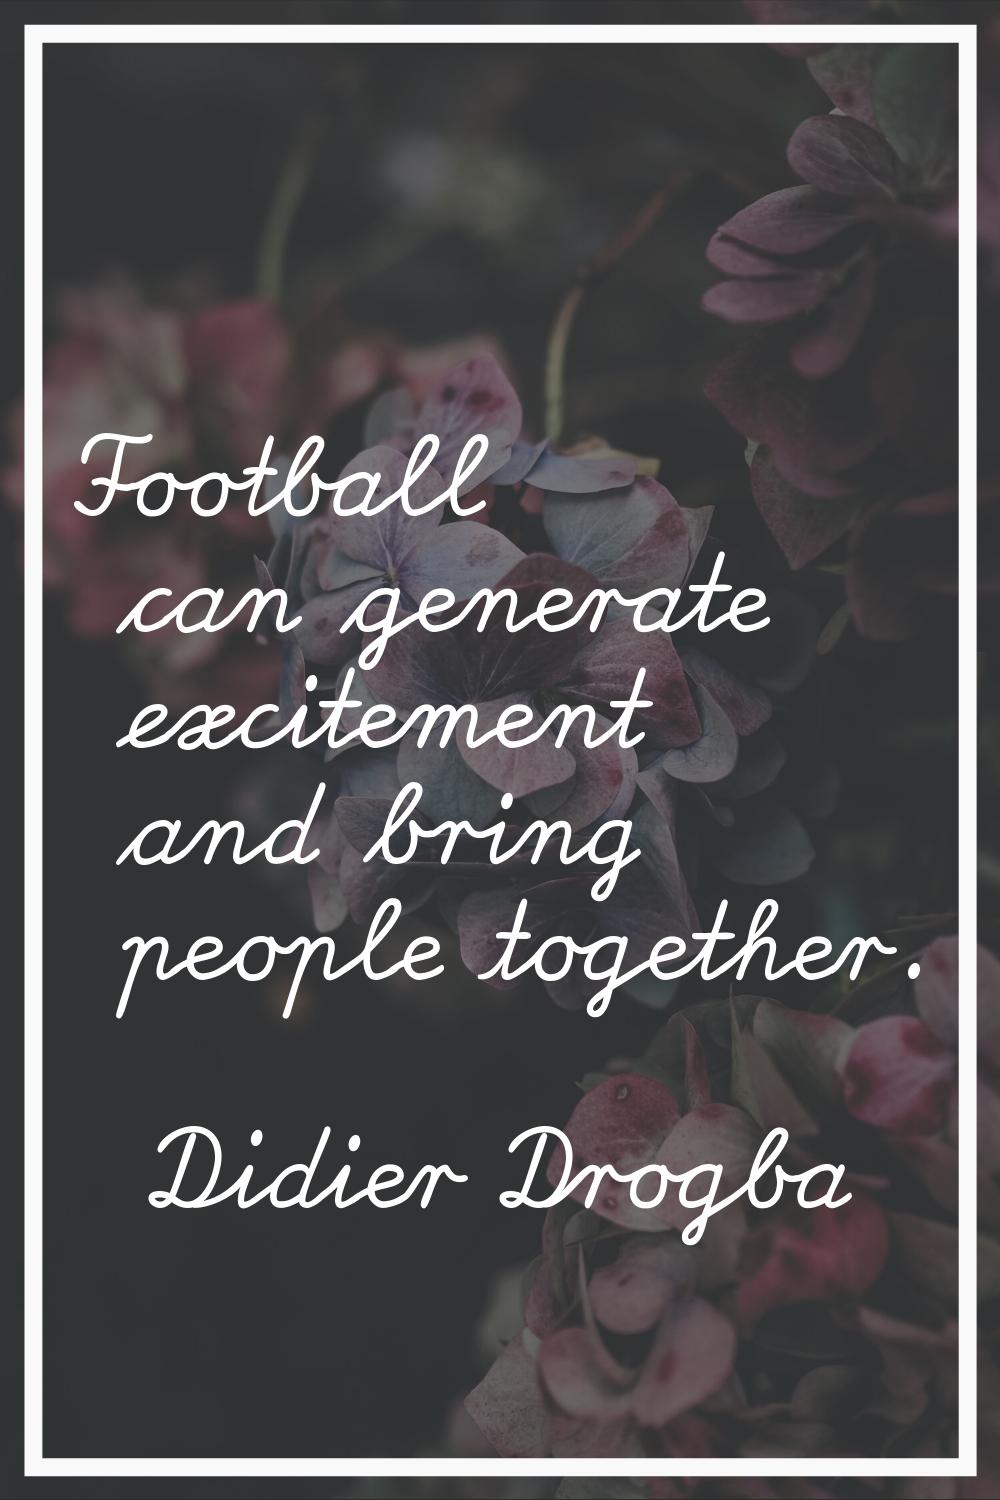 Football can generate excitement and bring people together.